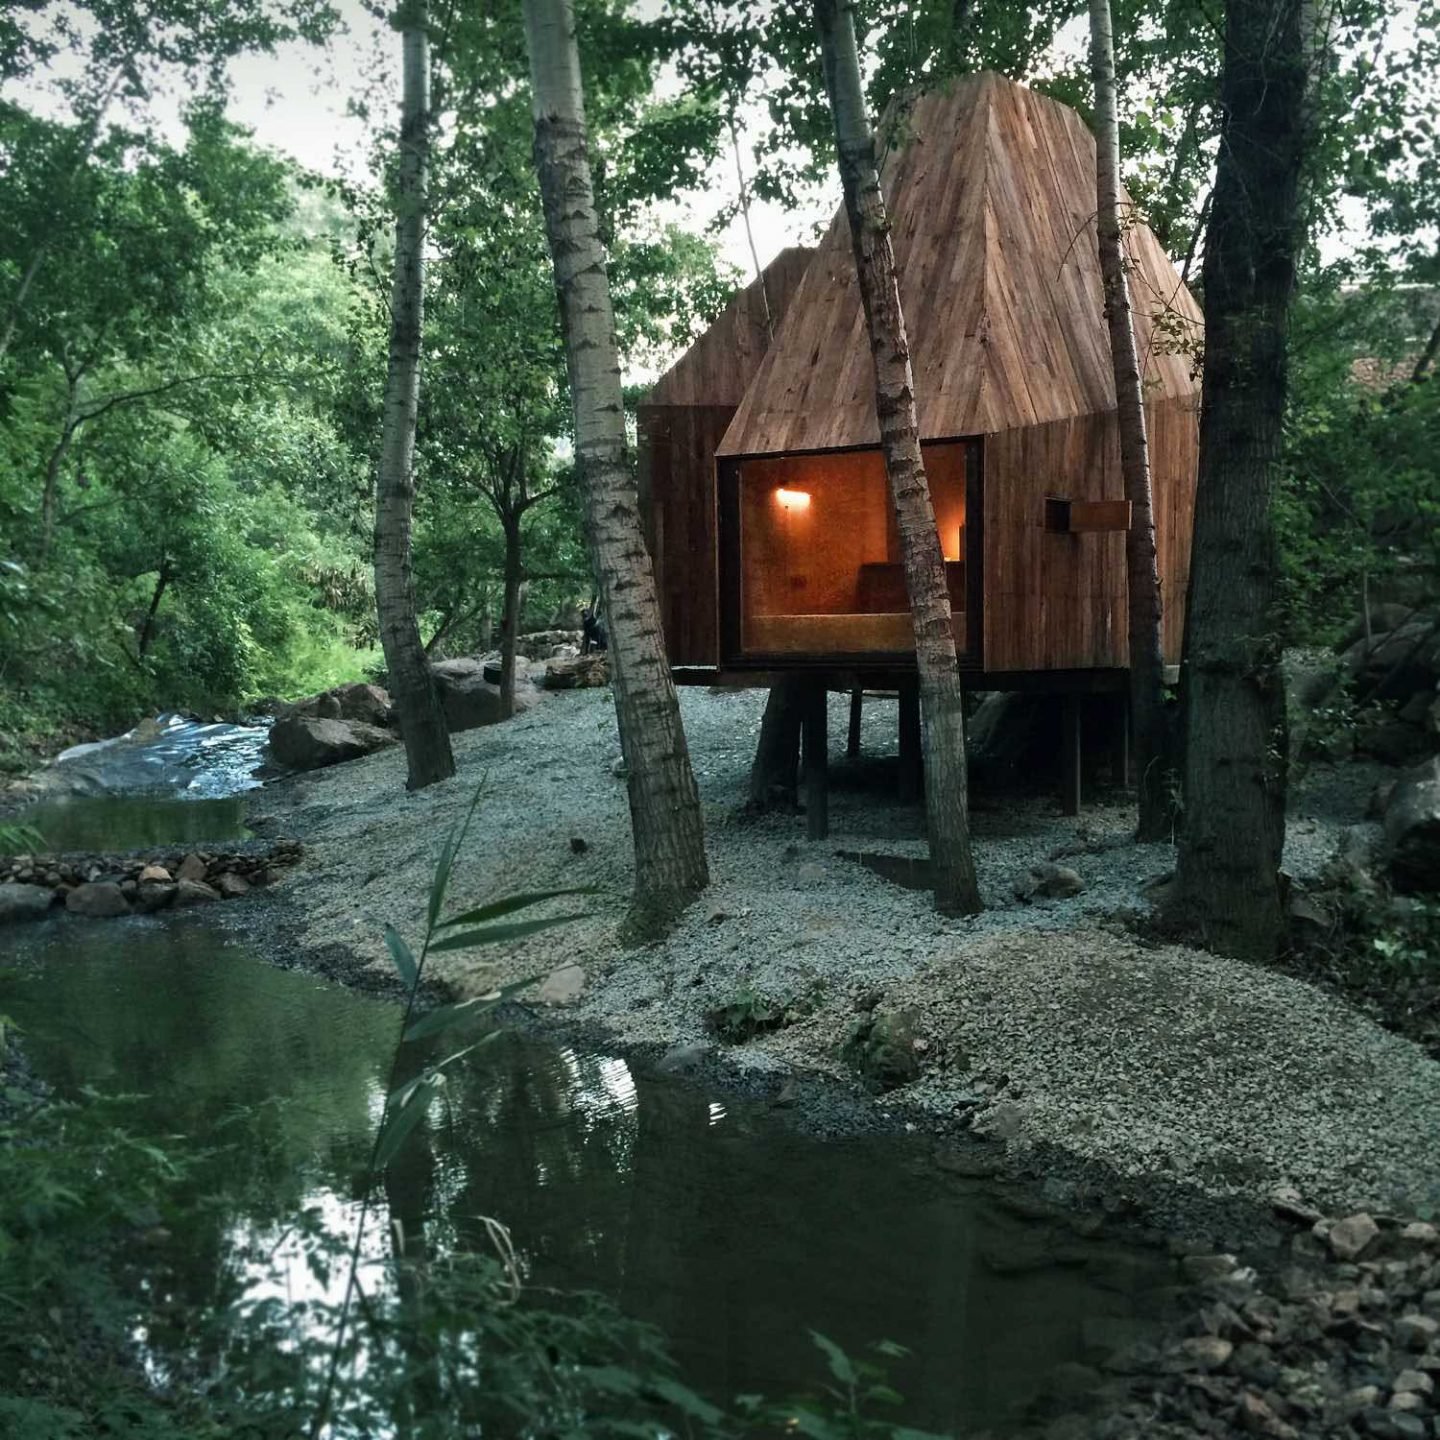 Architecture-Wee-Studio-Treehouse-9